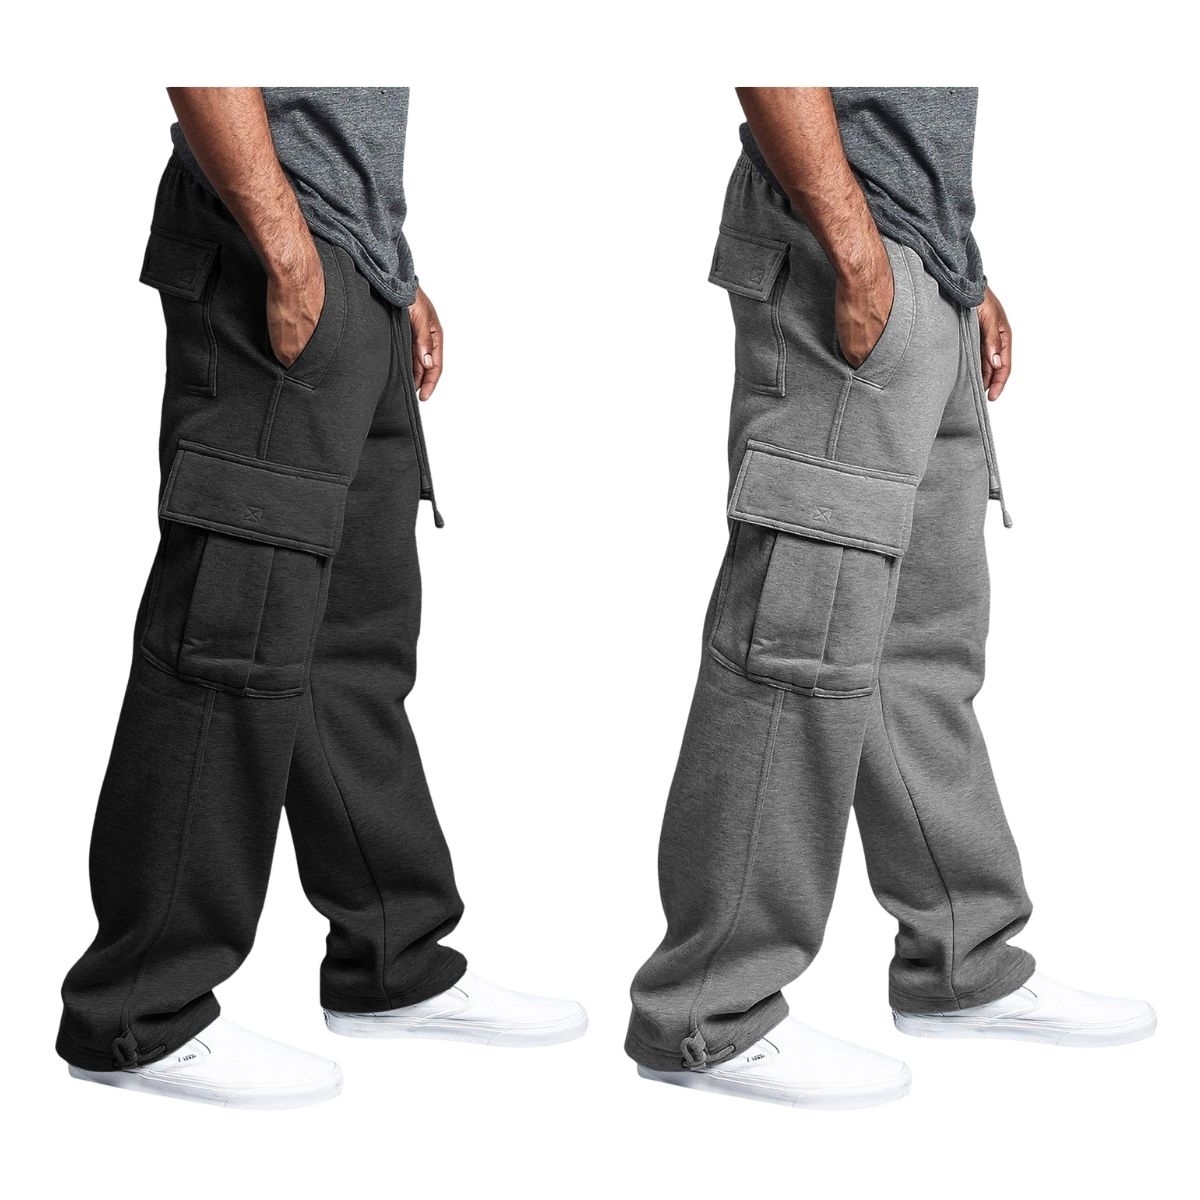 2-Pack: Men's Casual Solid Fleece Lined Cargo Jogger Soft Sweatpants With Pockets - Black&navy, Xx-large